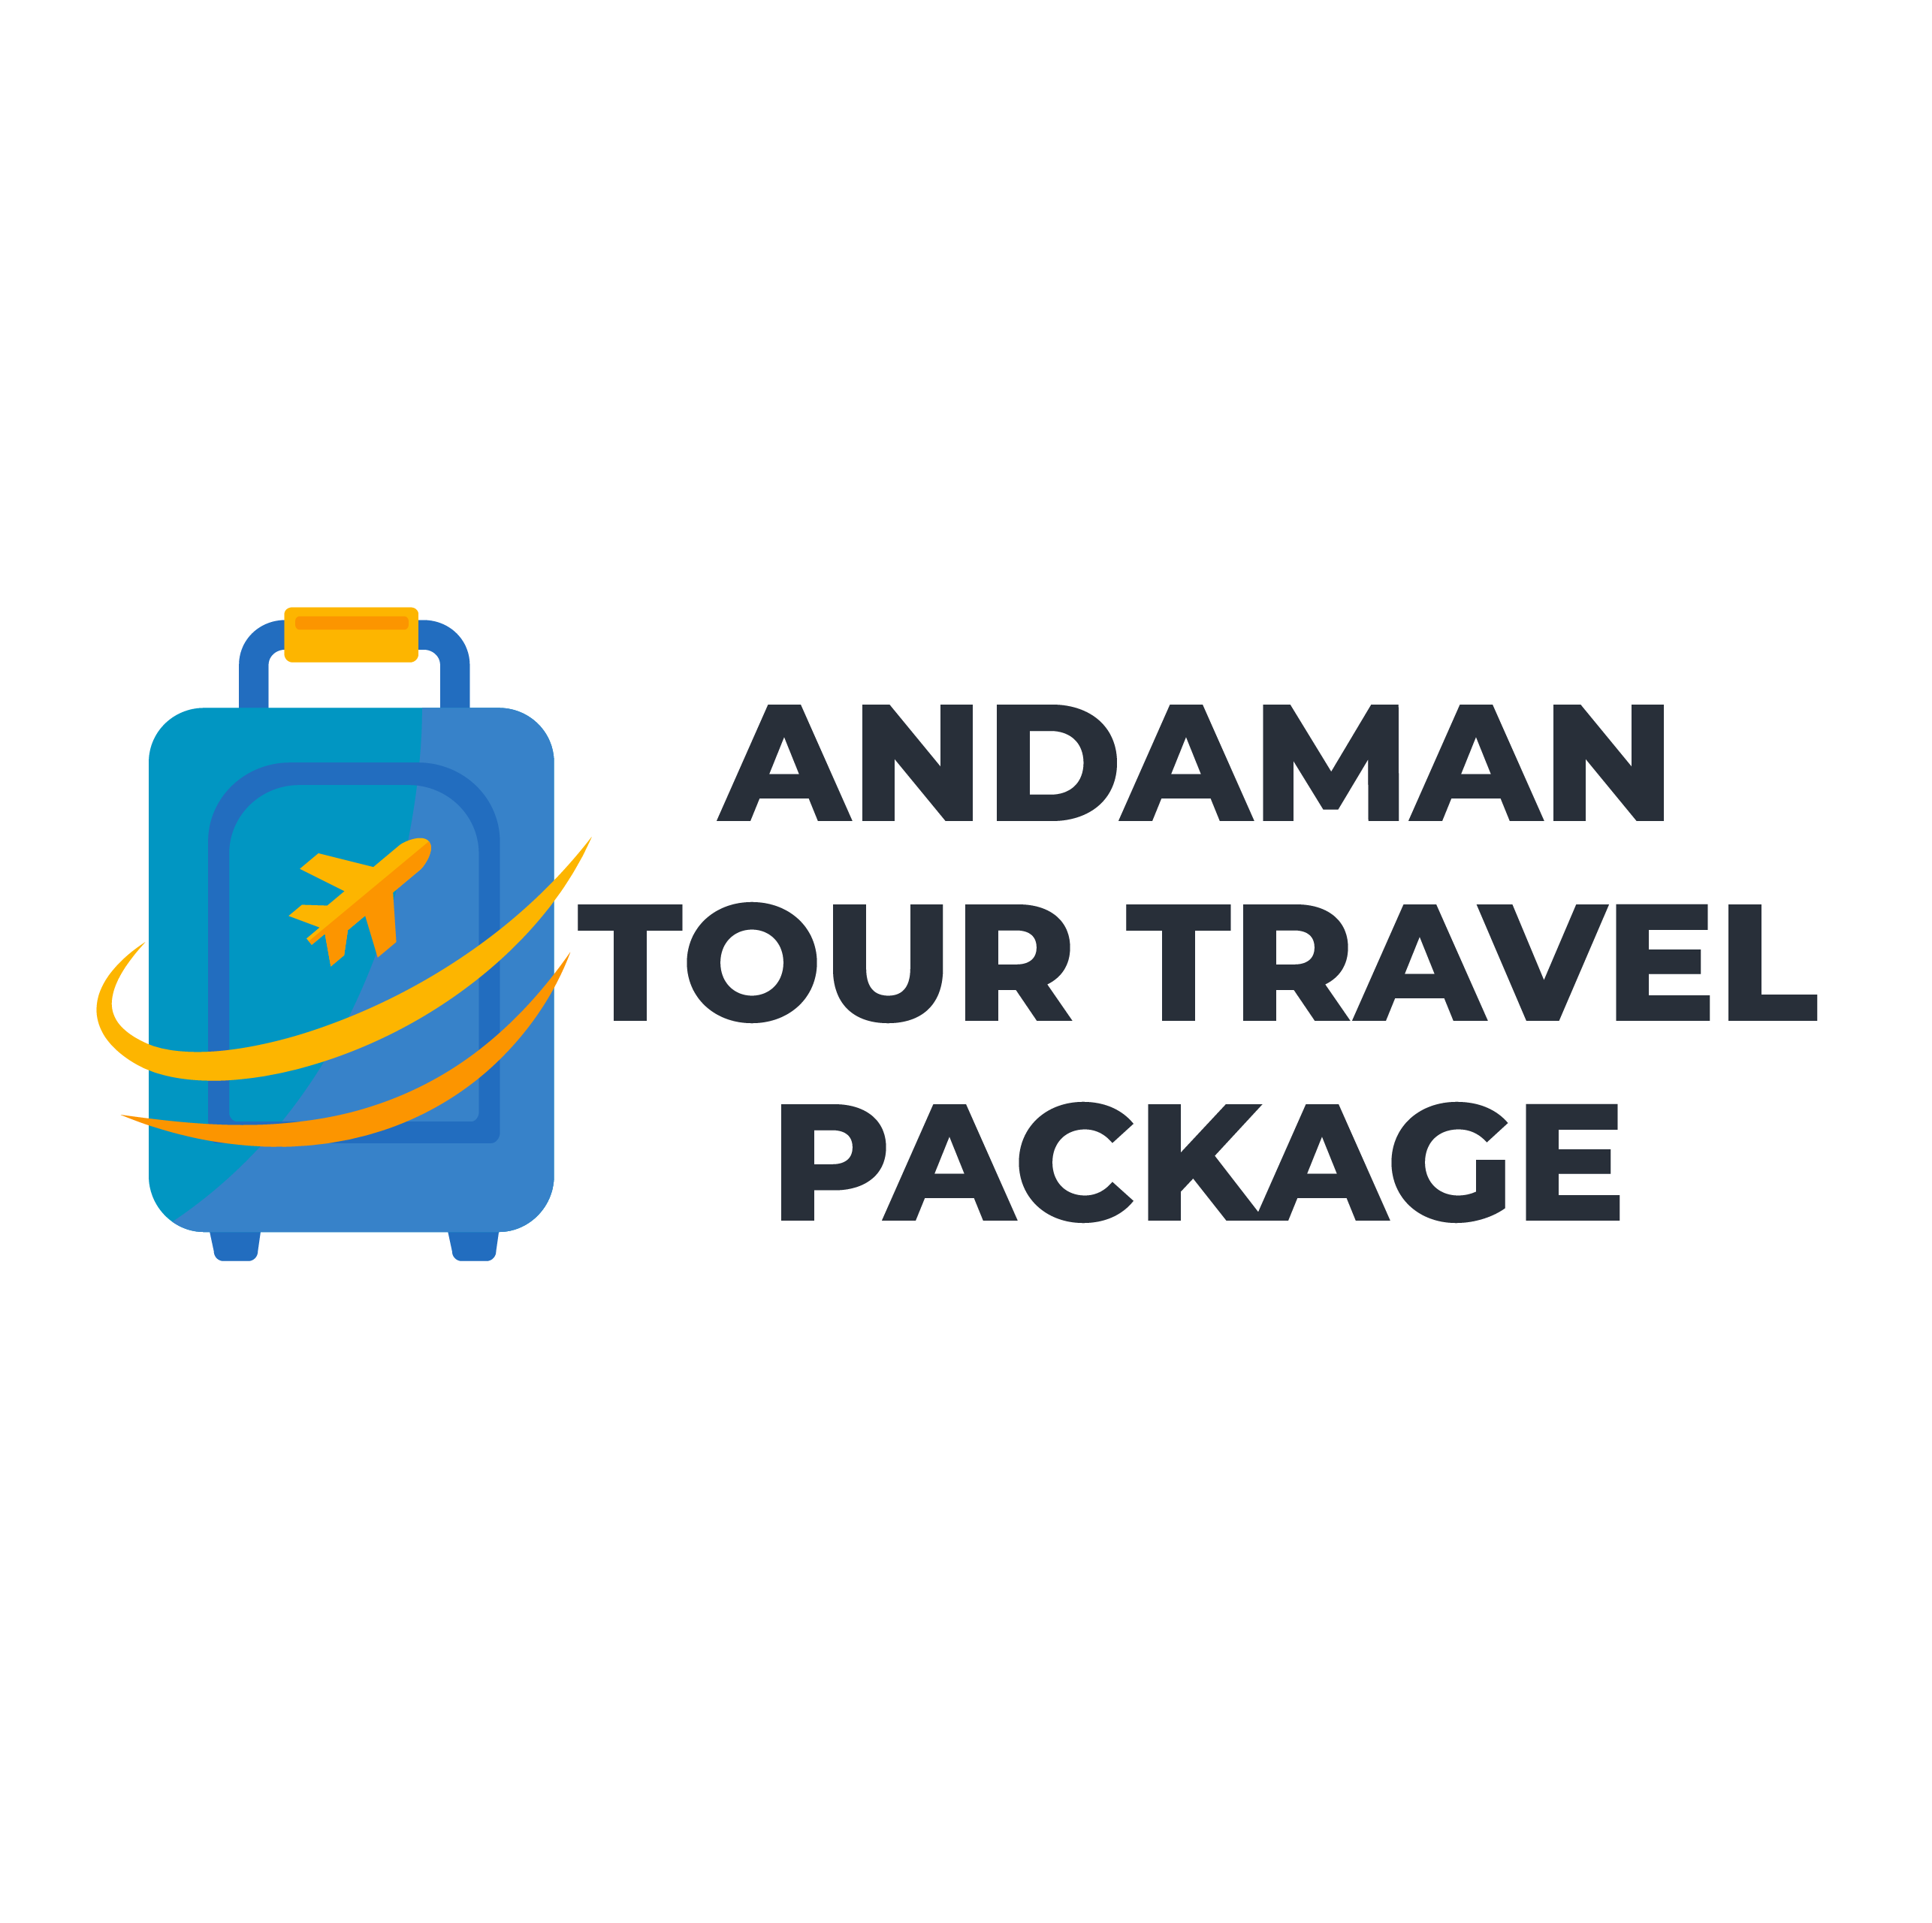 Andaman Tour Travel Packages